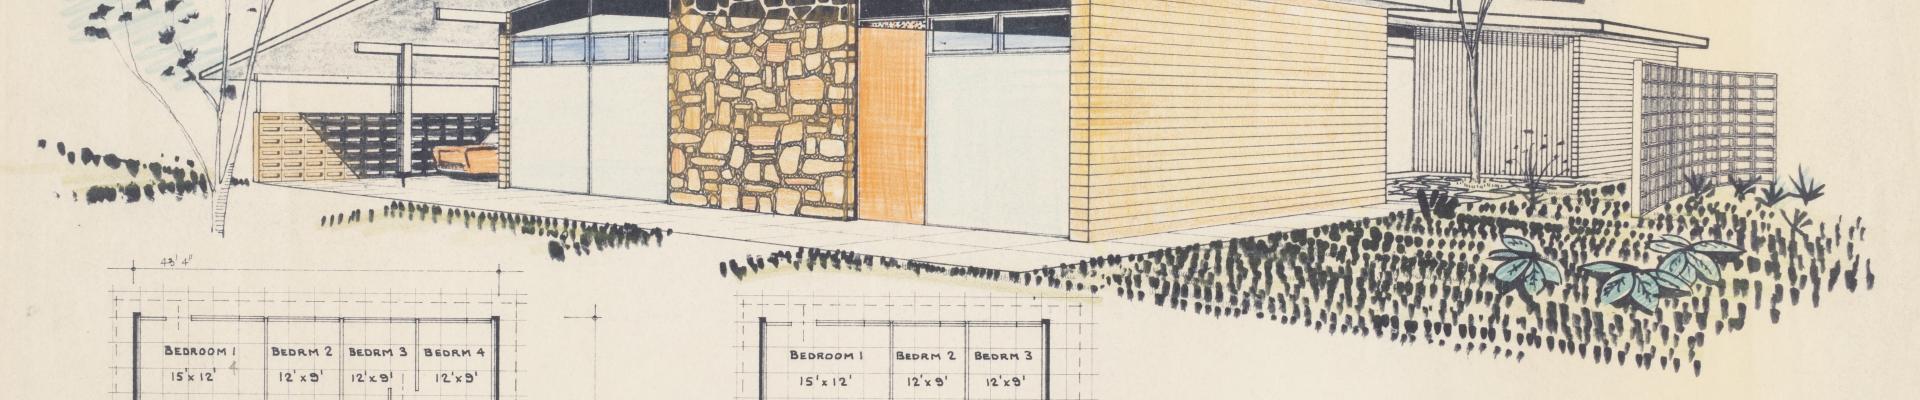 Design for the ‘Pan Pacific’ project home, Nino Sydney for Lend Lease Homes, c 1961